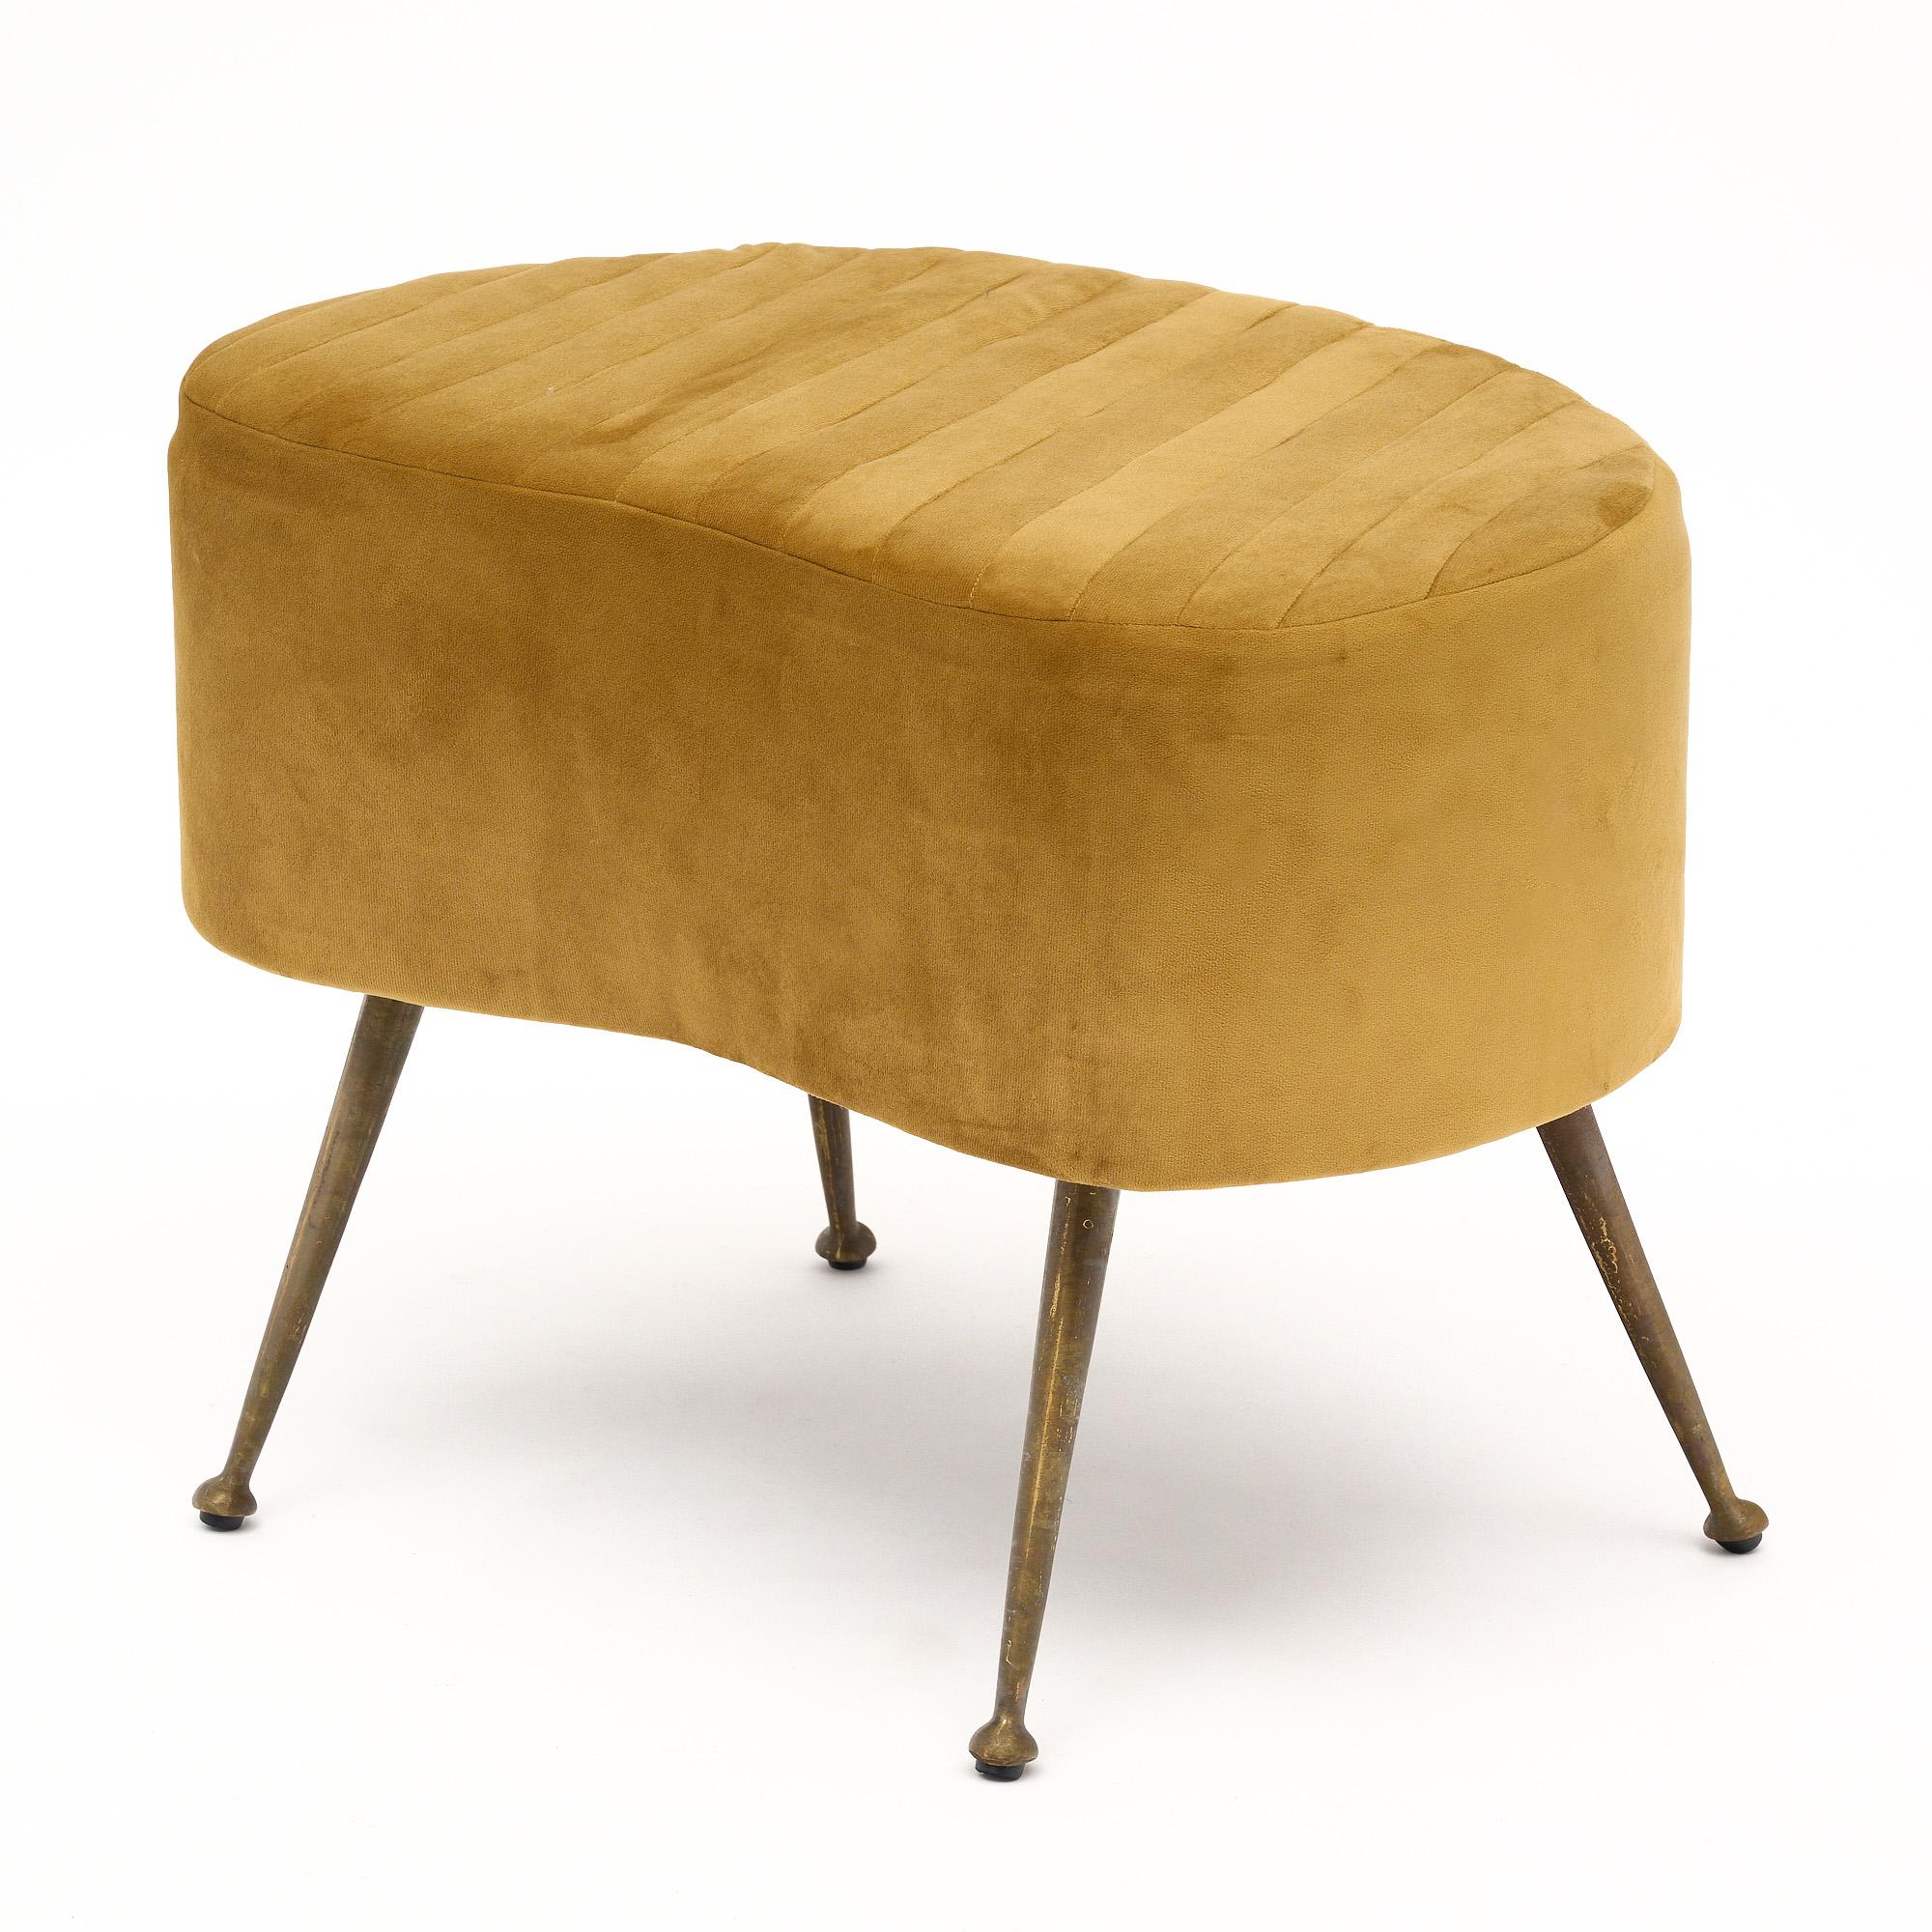 Late 20th Century Vintage Italian Modernist Gold Stools For Sale